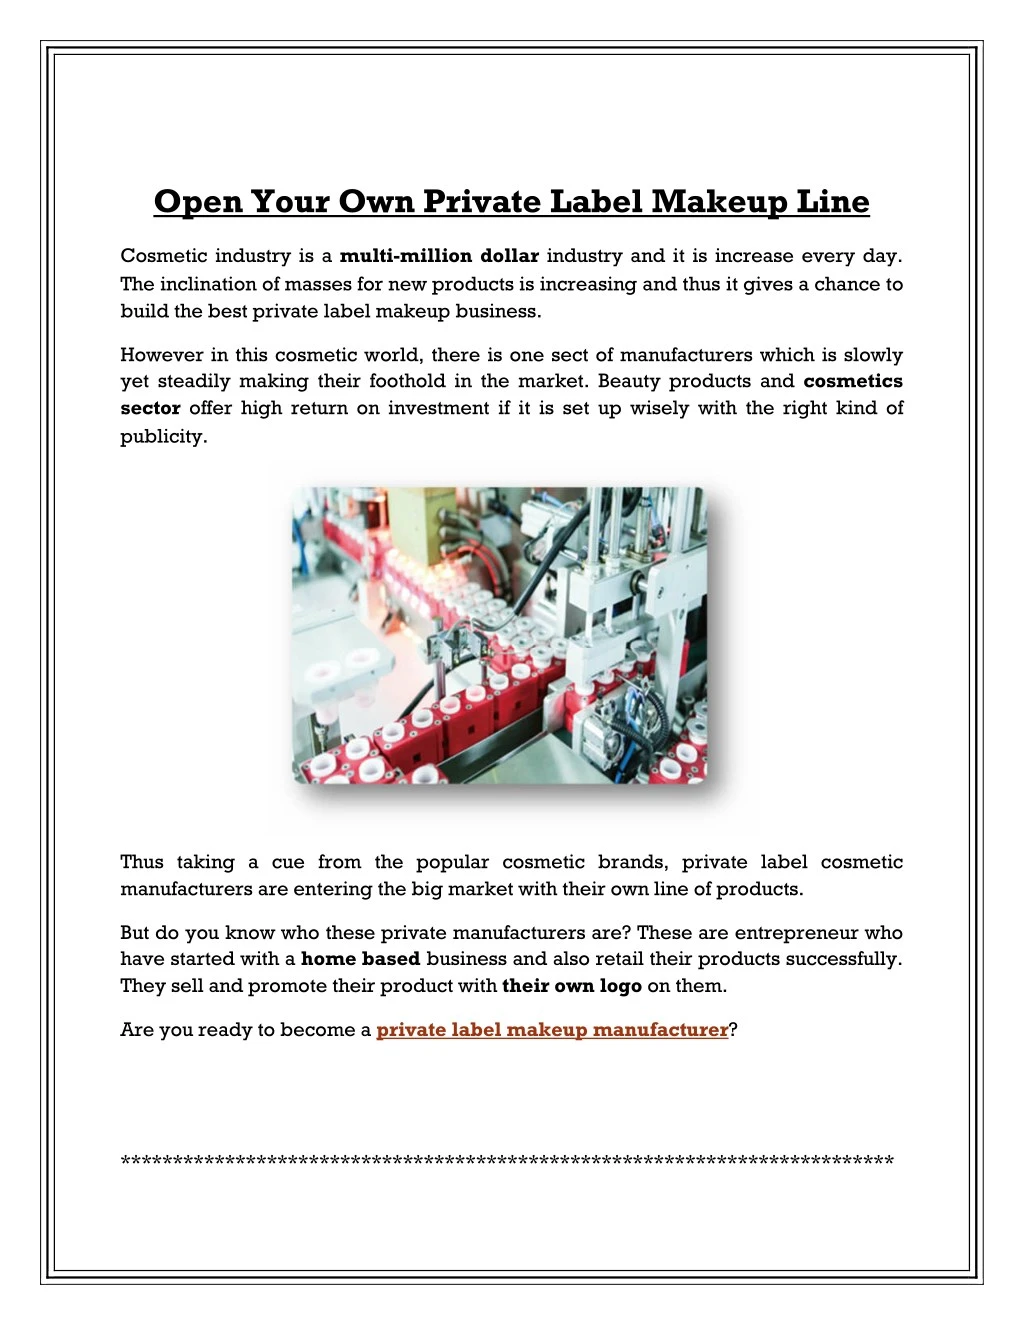 open your own private label makeup line